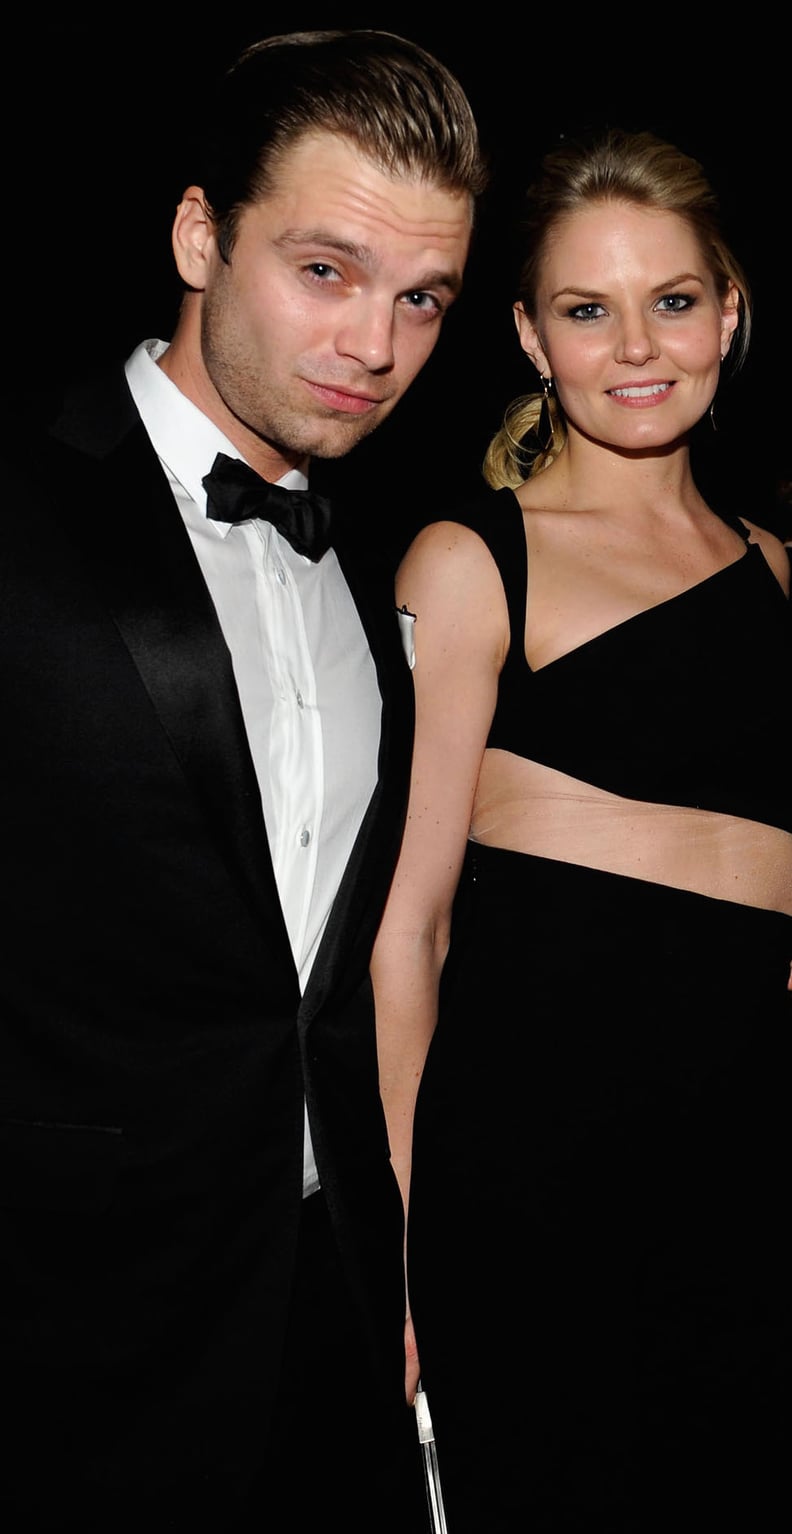 Sebastian went on to date his Once Upon a Time costar Jennifer Morrison from 2012 to 2013.